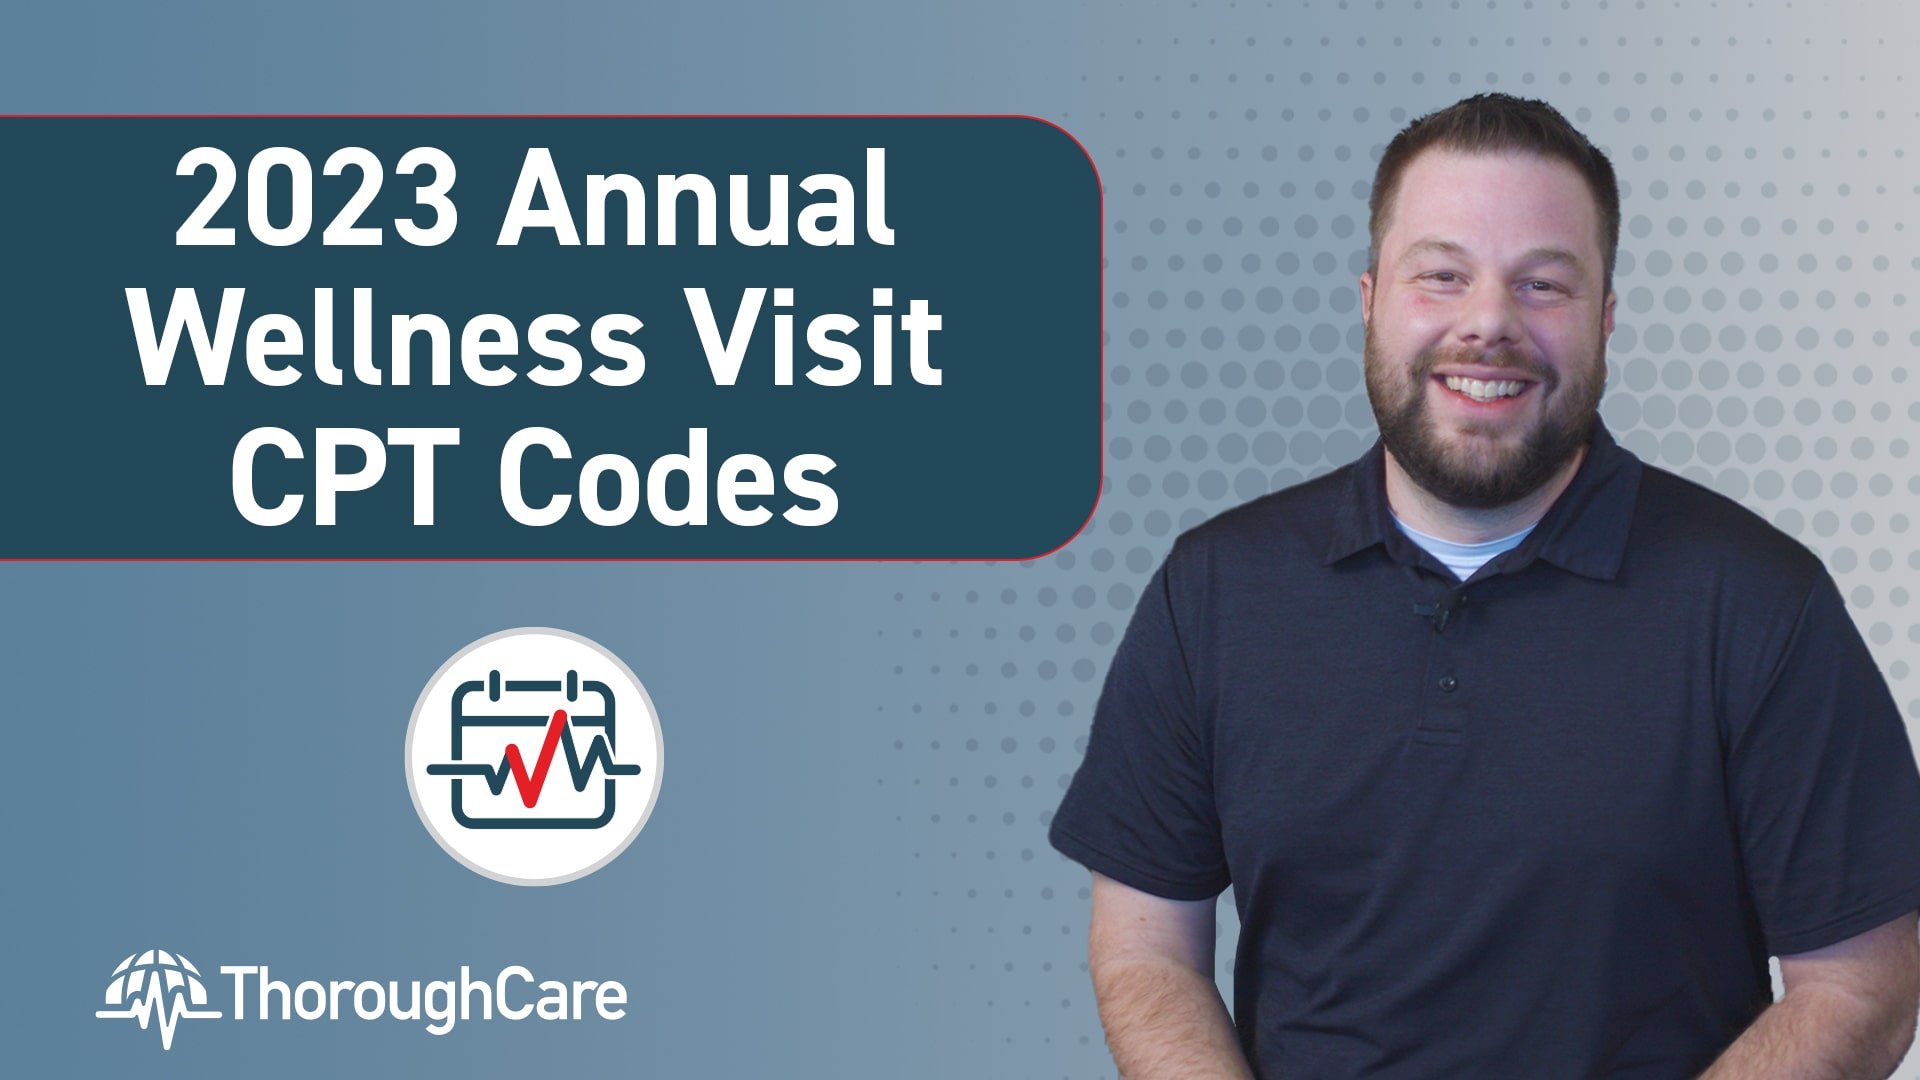 Annual Wellness Visits: 2023 CPT Codes and Reimbursement Rates